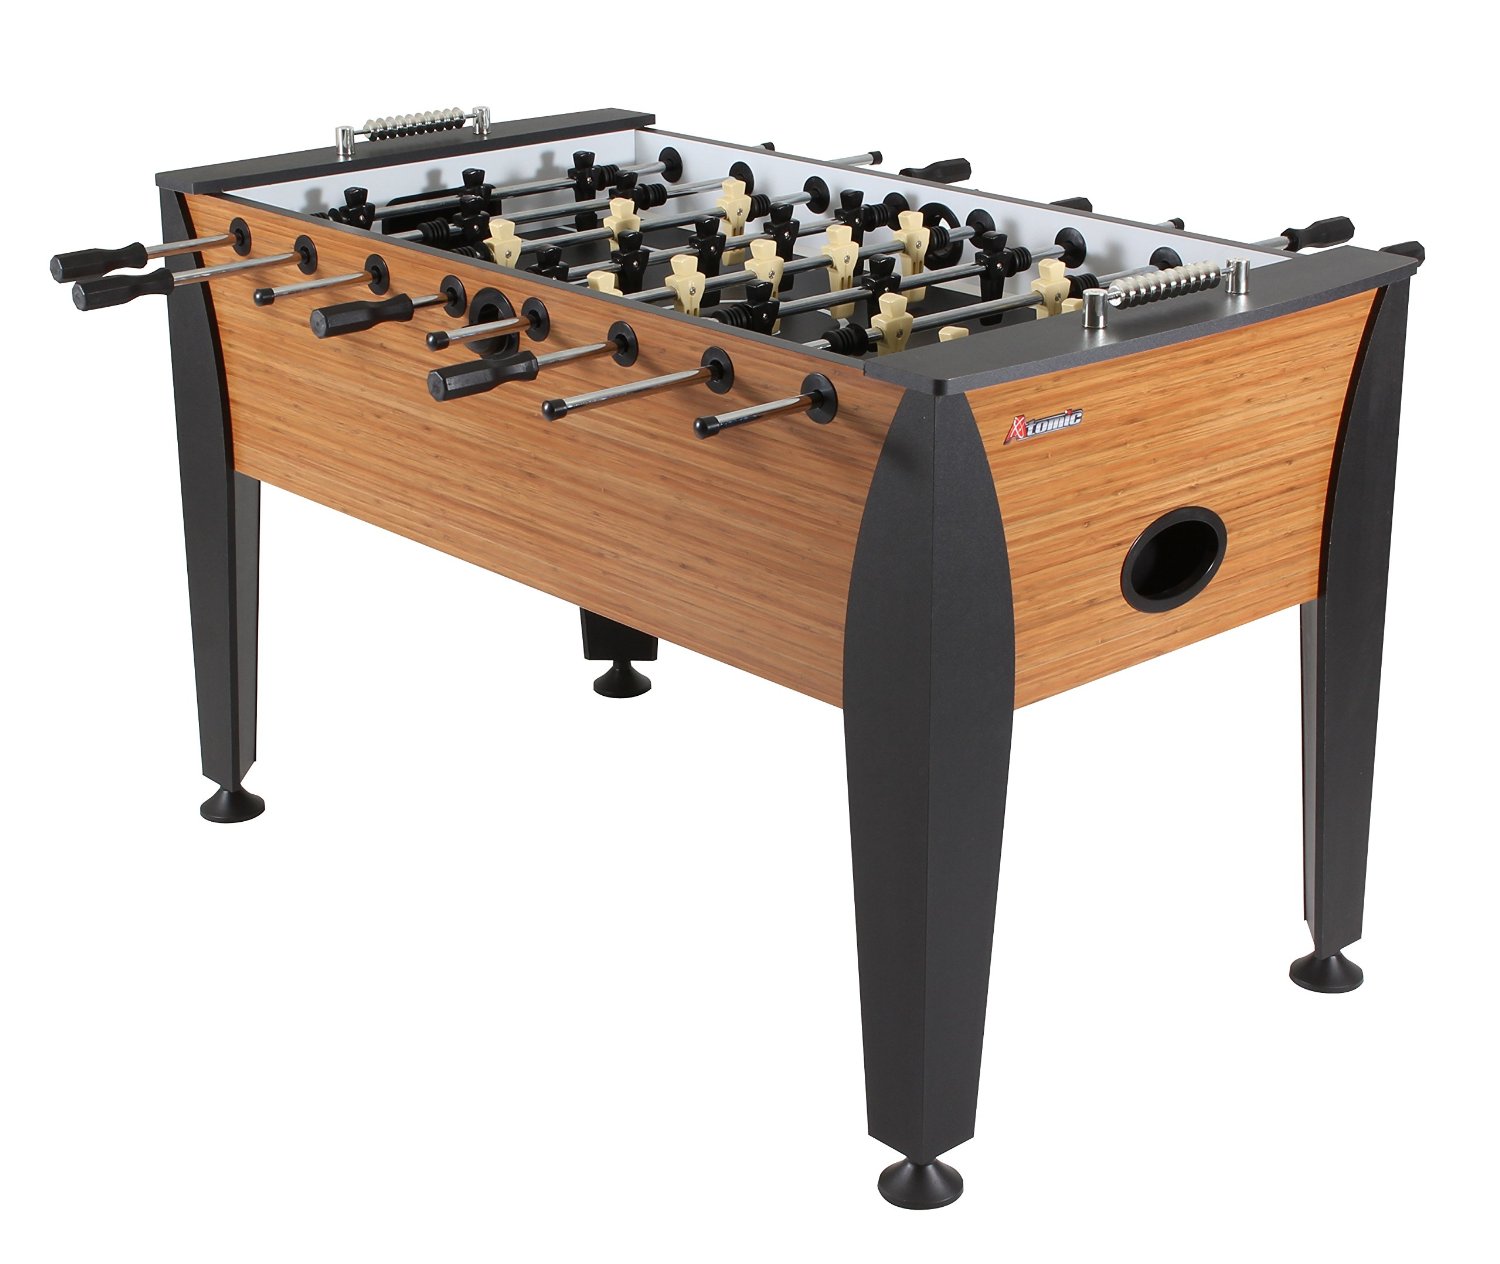 Pro Foosball Table by Atomic